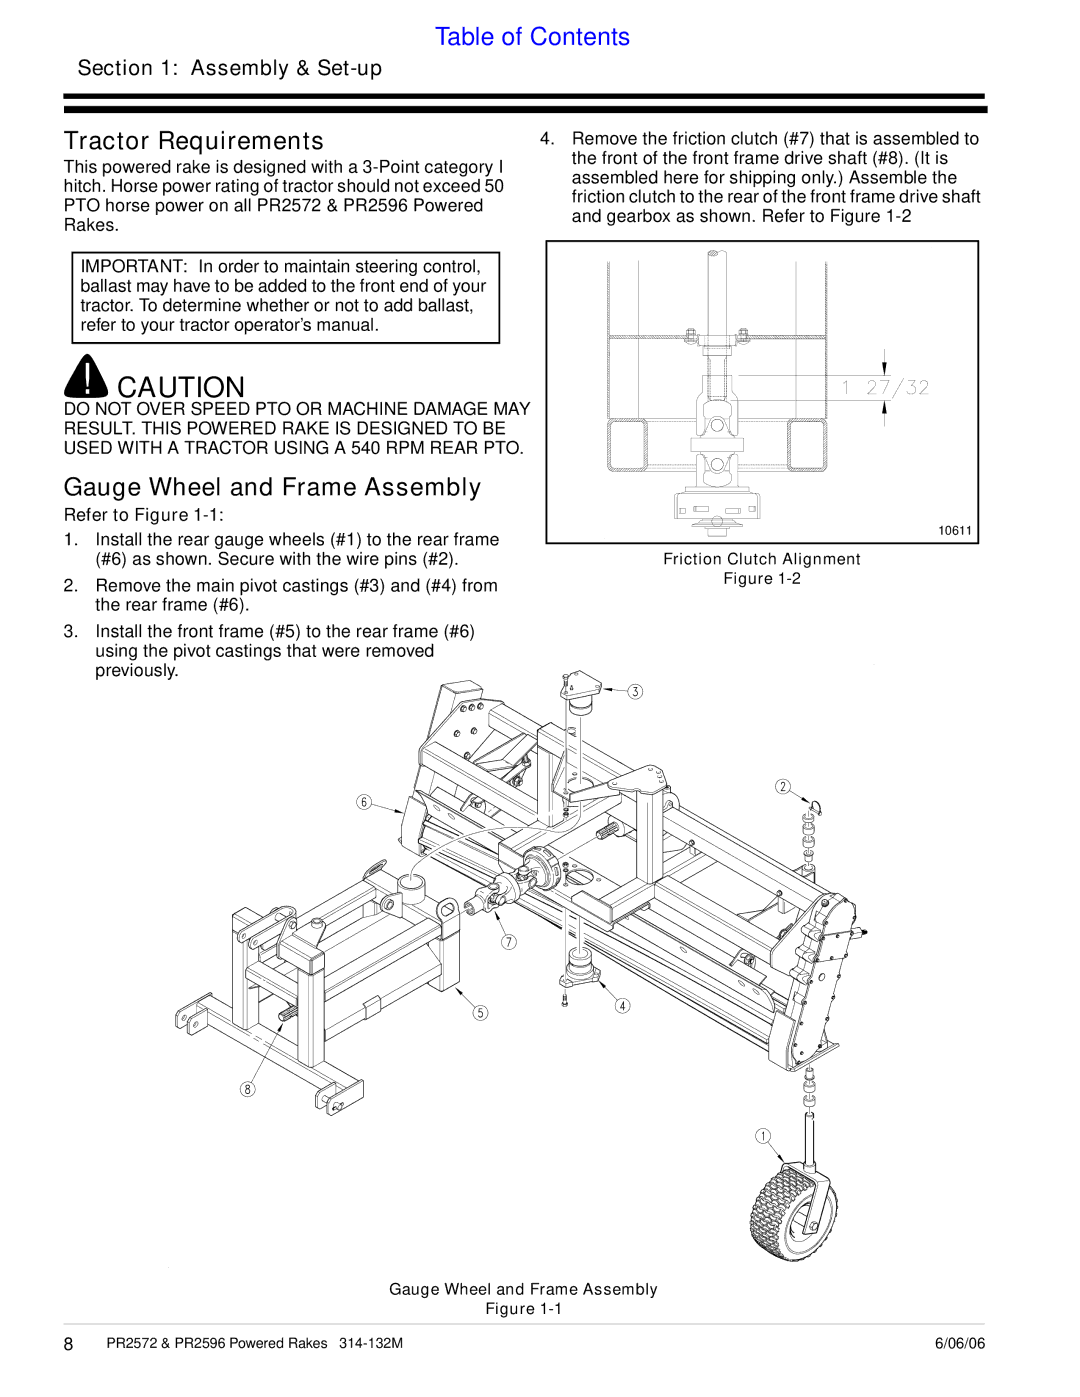 Land Pride PR2596, PR2572 manual Tractor Requirements, Gauge Wheel and Frame Assembly 